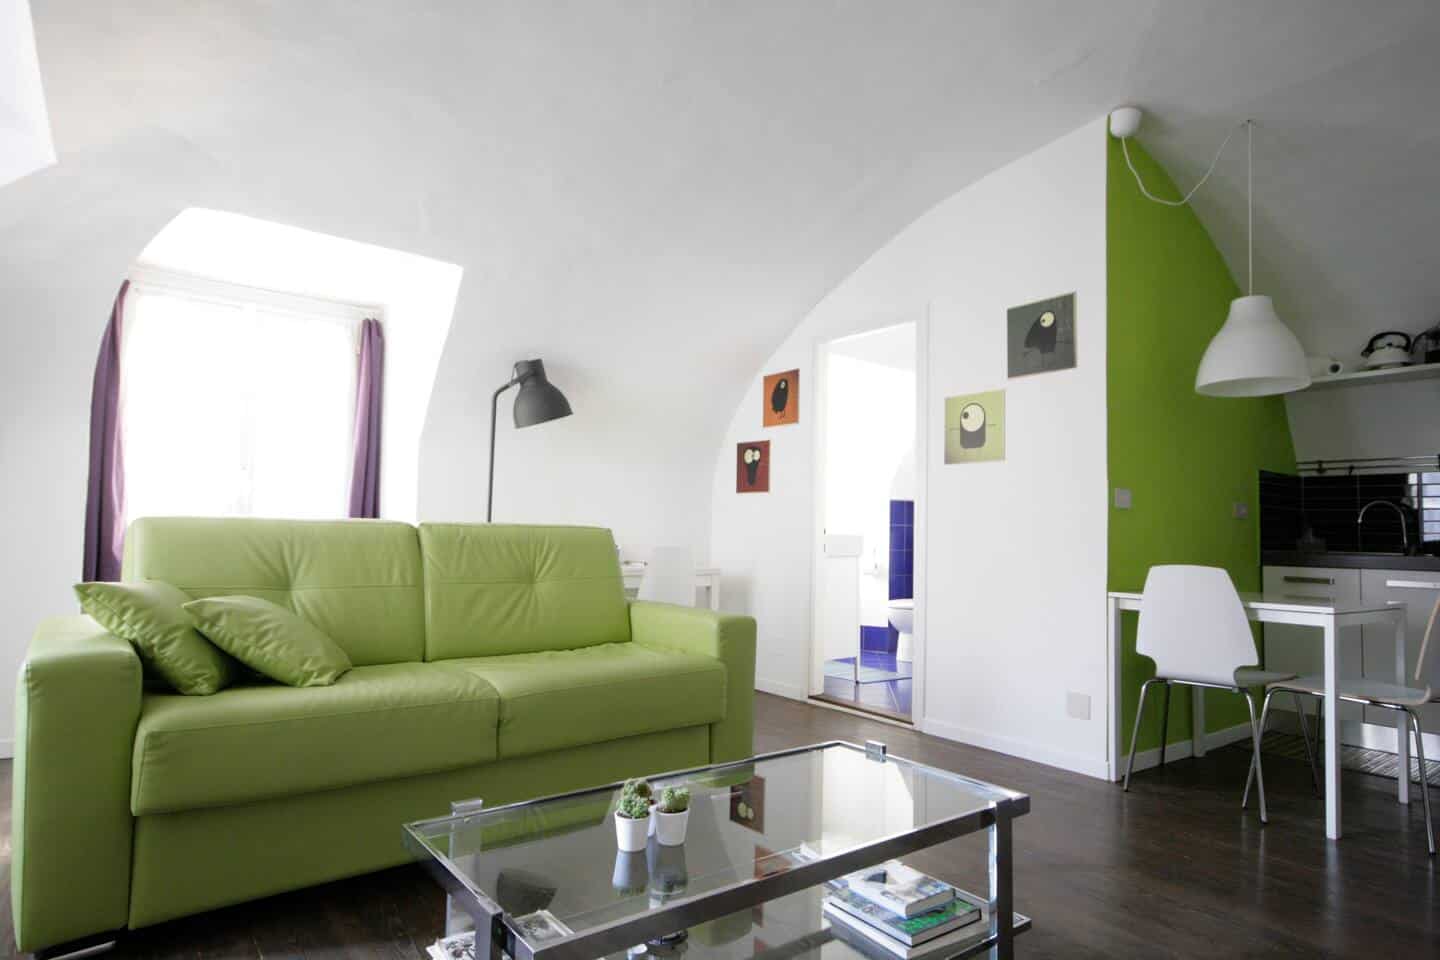 Image of Airbnb rental in Turin, Italy